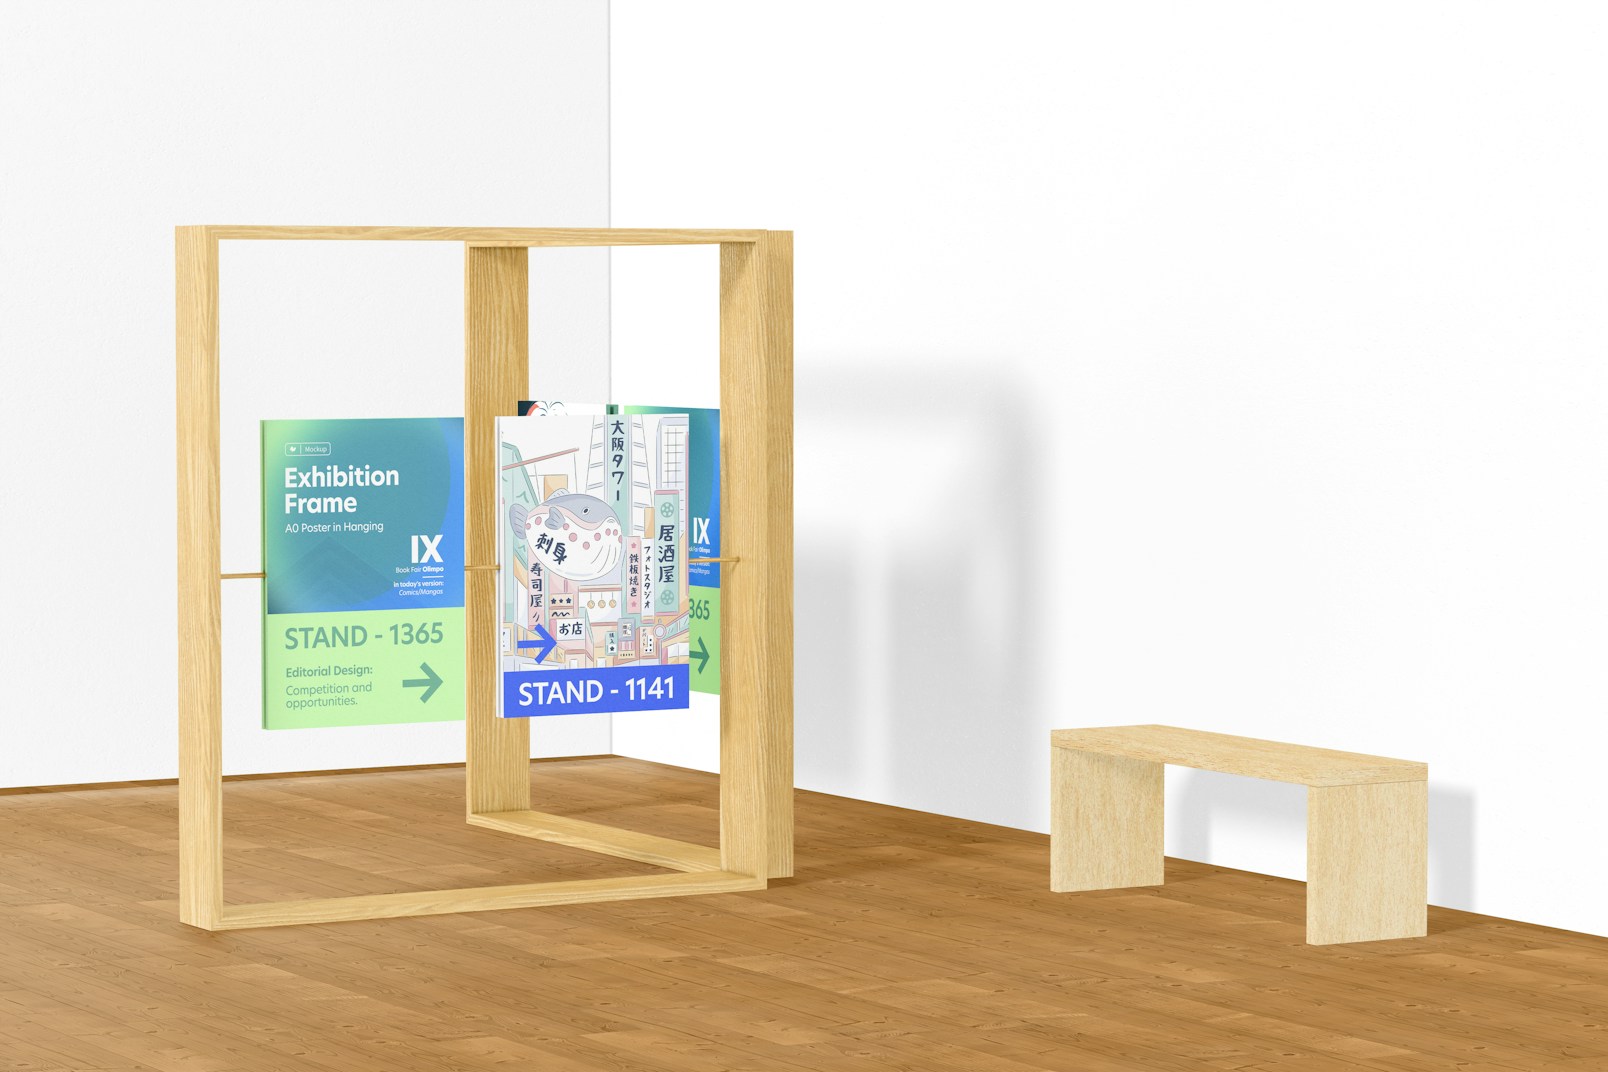 A0 Poster in Hanging Exhibition Frame Mockup, Left View